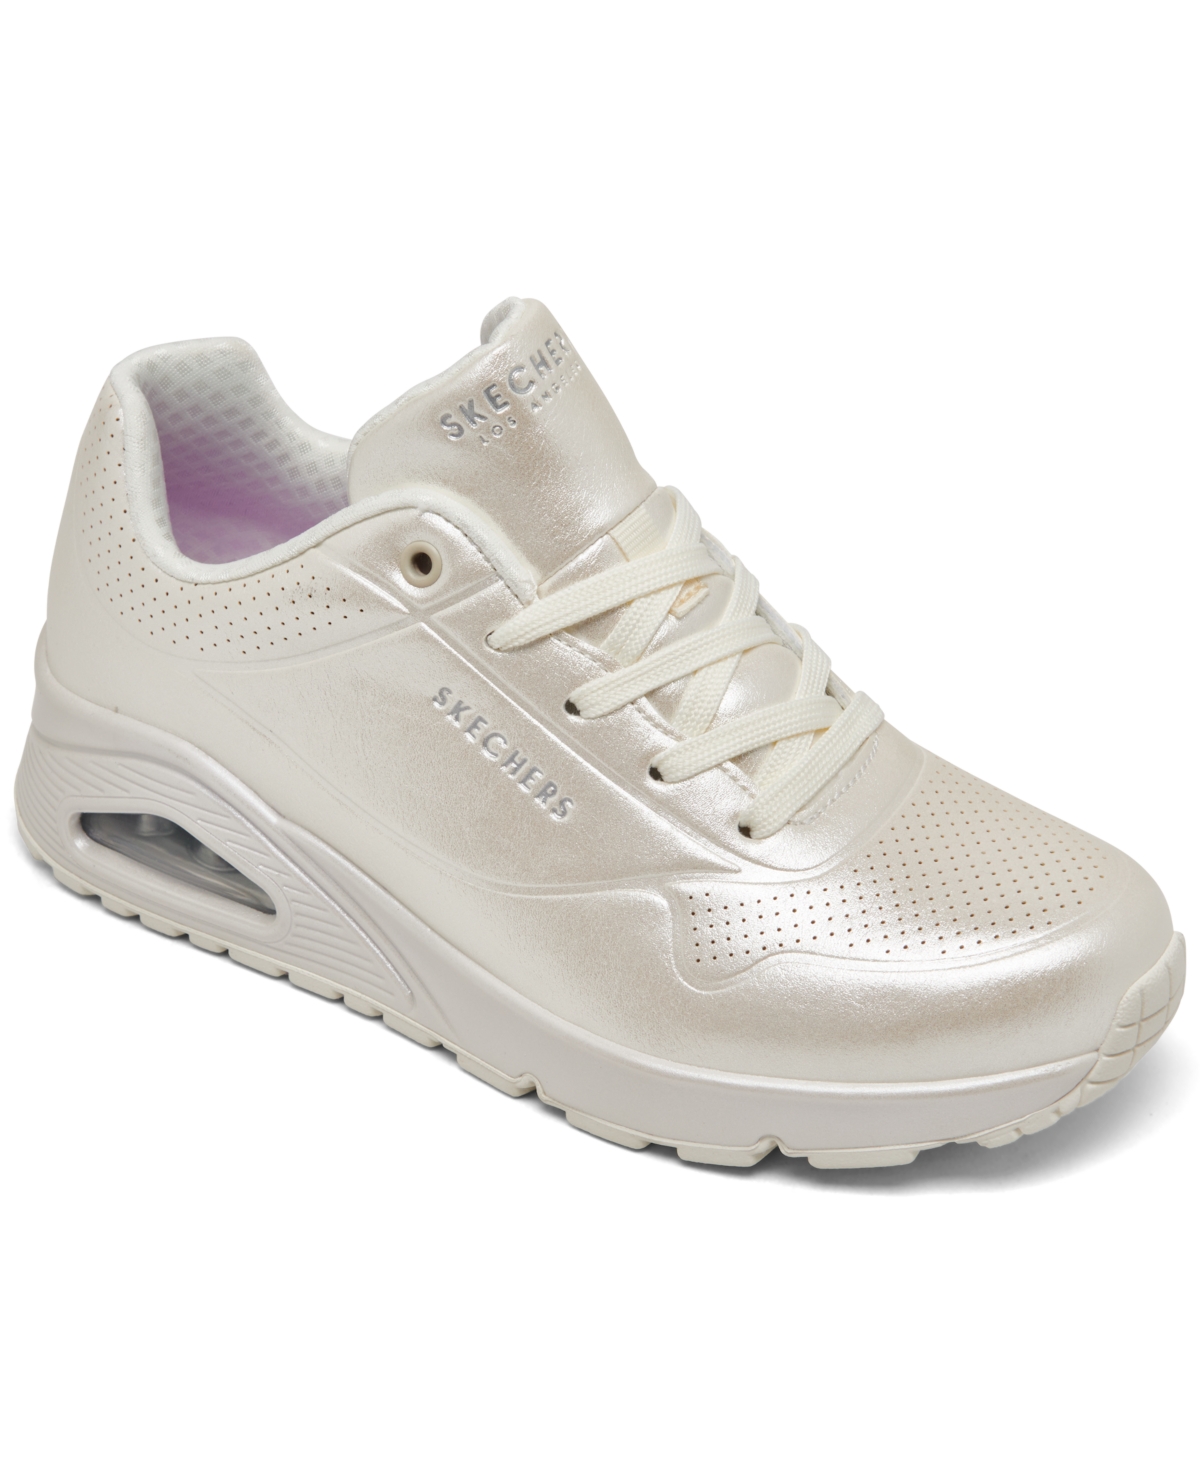 Street Women's Uno - Pearl Princess Casual Sneakers from Finish Line - White Pearlized/White Pea